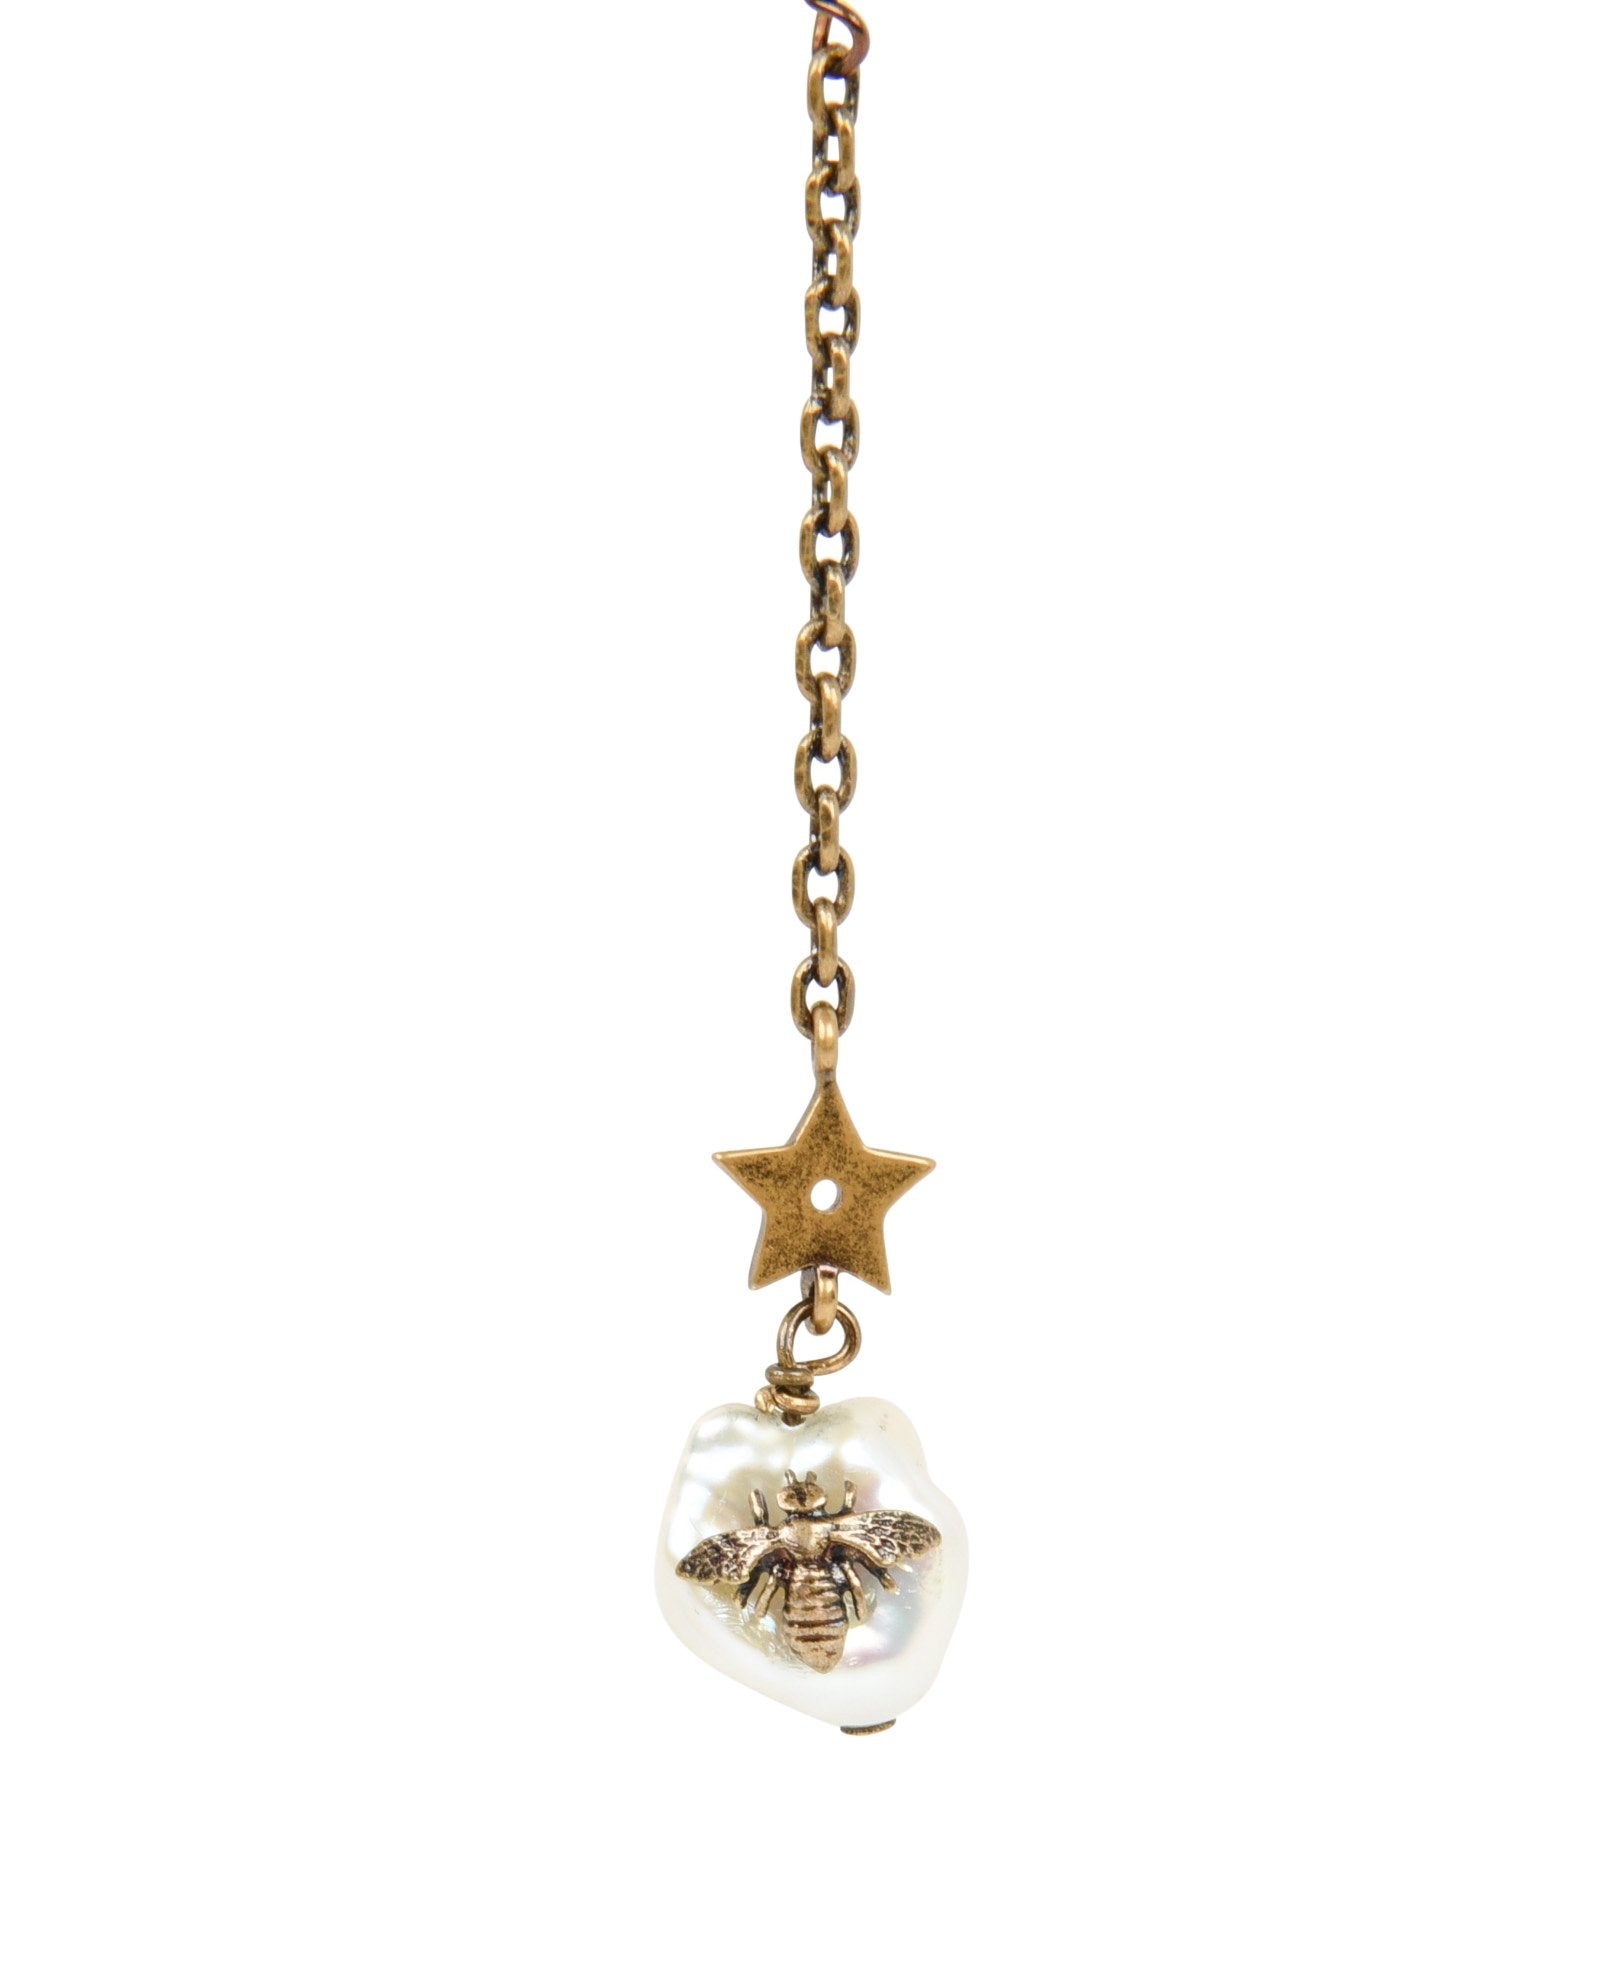 Dior, Jewelry, Christian Dior Dior Dior Pearl Necklace Charm Bee Star  Clover Fashionable Gold O